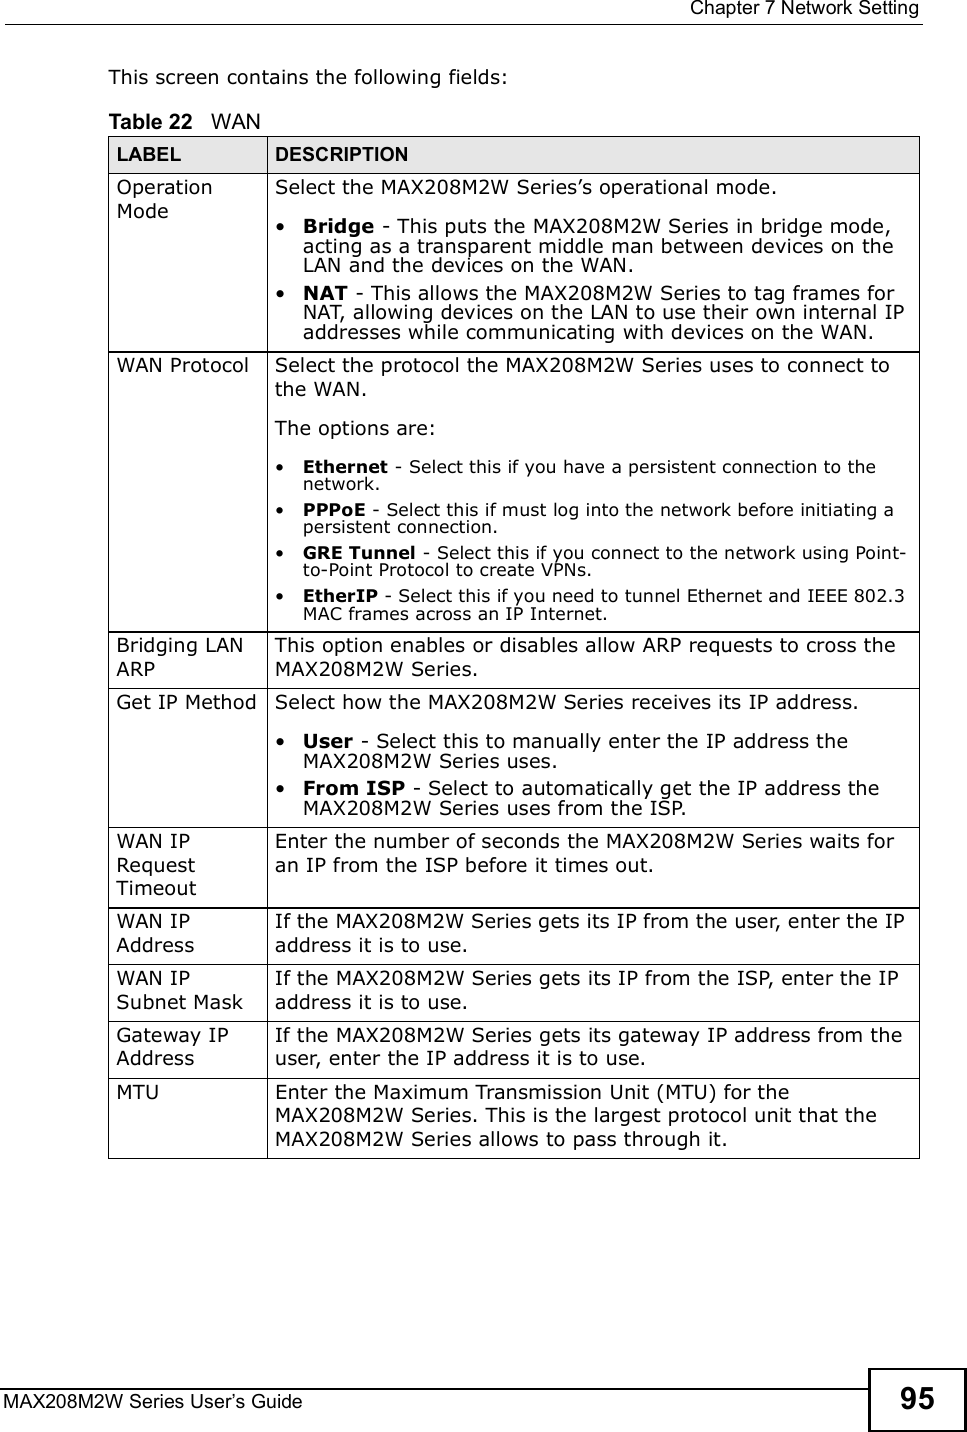  Chapter 7Network SettingMAX208M2W Series User s Guide 95This screen contains the following fields:Table 22   WANLABEL DESCRIPTIONOperation ModeSelect the MAX208M2W Series s operational mode.!Bridge - This puts the MAX208M2W Series in bridge mode, acting as a transparent middle man between devices on the LAN and the devices on the WAN.!NAT - This allows the MAX208M2W Series to tag frames for NAT, allowing devices on the LAN to use their own internal IP addresses while communicating with devices on the WAN.WAN ProtocolSelect the protocol the MAX208M2W Series uses to connect to the WAN.The options are:!Ethernet - Select this if you have a persistent connection to the network.!PPPoE - Select this if must log into the network before initiating a persistent connection.!GRE Tunnel - Select this if you connect to the network using Point-to-Point Protocol to create VPNs.!EtherIP - Select this if you need to tunnel Ethernet and IEEE 802.3 MAC frames across an IP Internet.Bridging LAN ARPThis option enables or disables allow ARP requests to cross the MAX208M2W Series.Get IP MethodSelect how the MAX208M2W Series receives its IP address.!User - Select this to manually enter the IP address the MAX208M2W Series uses.!From ISP - Select to automatically get the IP address the MAX208M2W Series uses from the ISP.WAN IP Request TimeoutEnter the number of seconds the MAX208M2W Series waits for an IP from the ISP before it times out.WAN IP AddressIf the MAX208M2W Series gets its IP from the user, enter the IP address it is to use.WAN IP Subnet MaskIf the MAX208M2W Series gets its IP from the ISP, enter the IP address it is to use.Gateway IP AddressIf the MAX208M2W Series gets its gateway IP address from the user, enter the IP address it is to use.MTUEnter the Maximum Transmission Unit (MTU) for the MAX208M2W Series. This is the largest protocol unit that the MAX208M2W Series allows to pass through it.